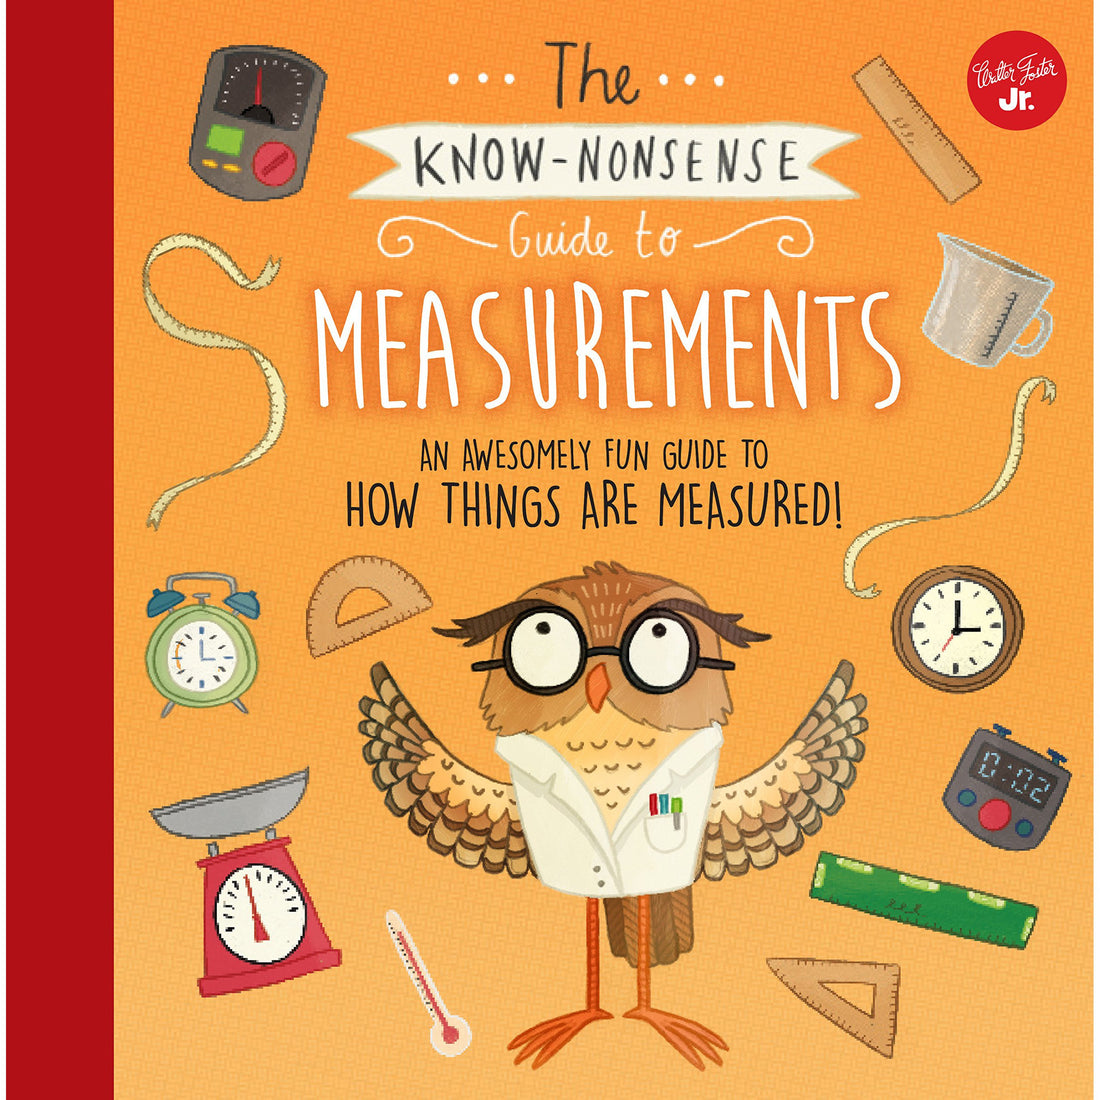 book-the-know-nonsense-guide-to-measurements-an-awesomely-fun-guide-to-how-thins-are-measured- (1)